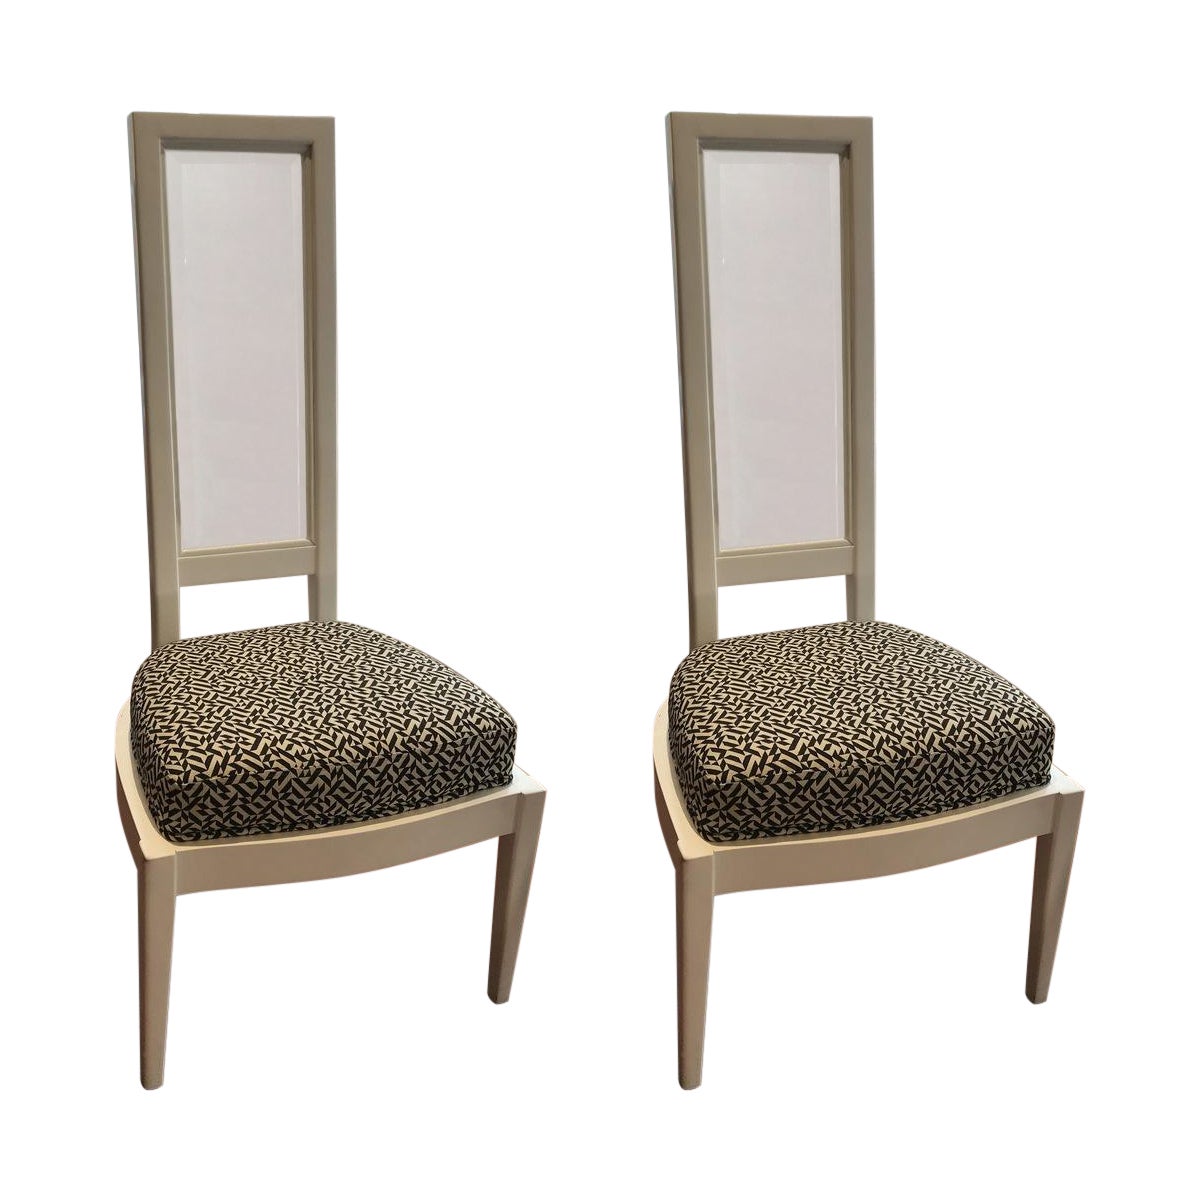 Lucite Back and White Lacquer Pair of Chairs For Sale